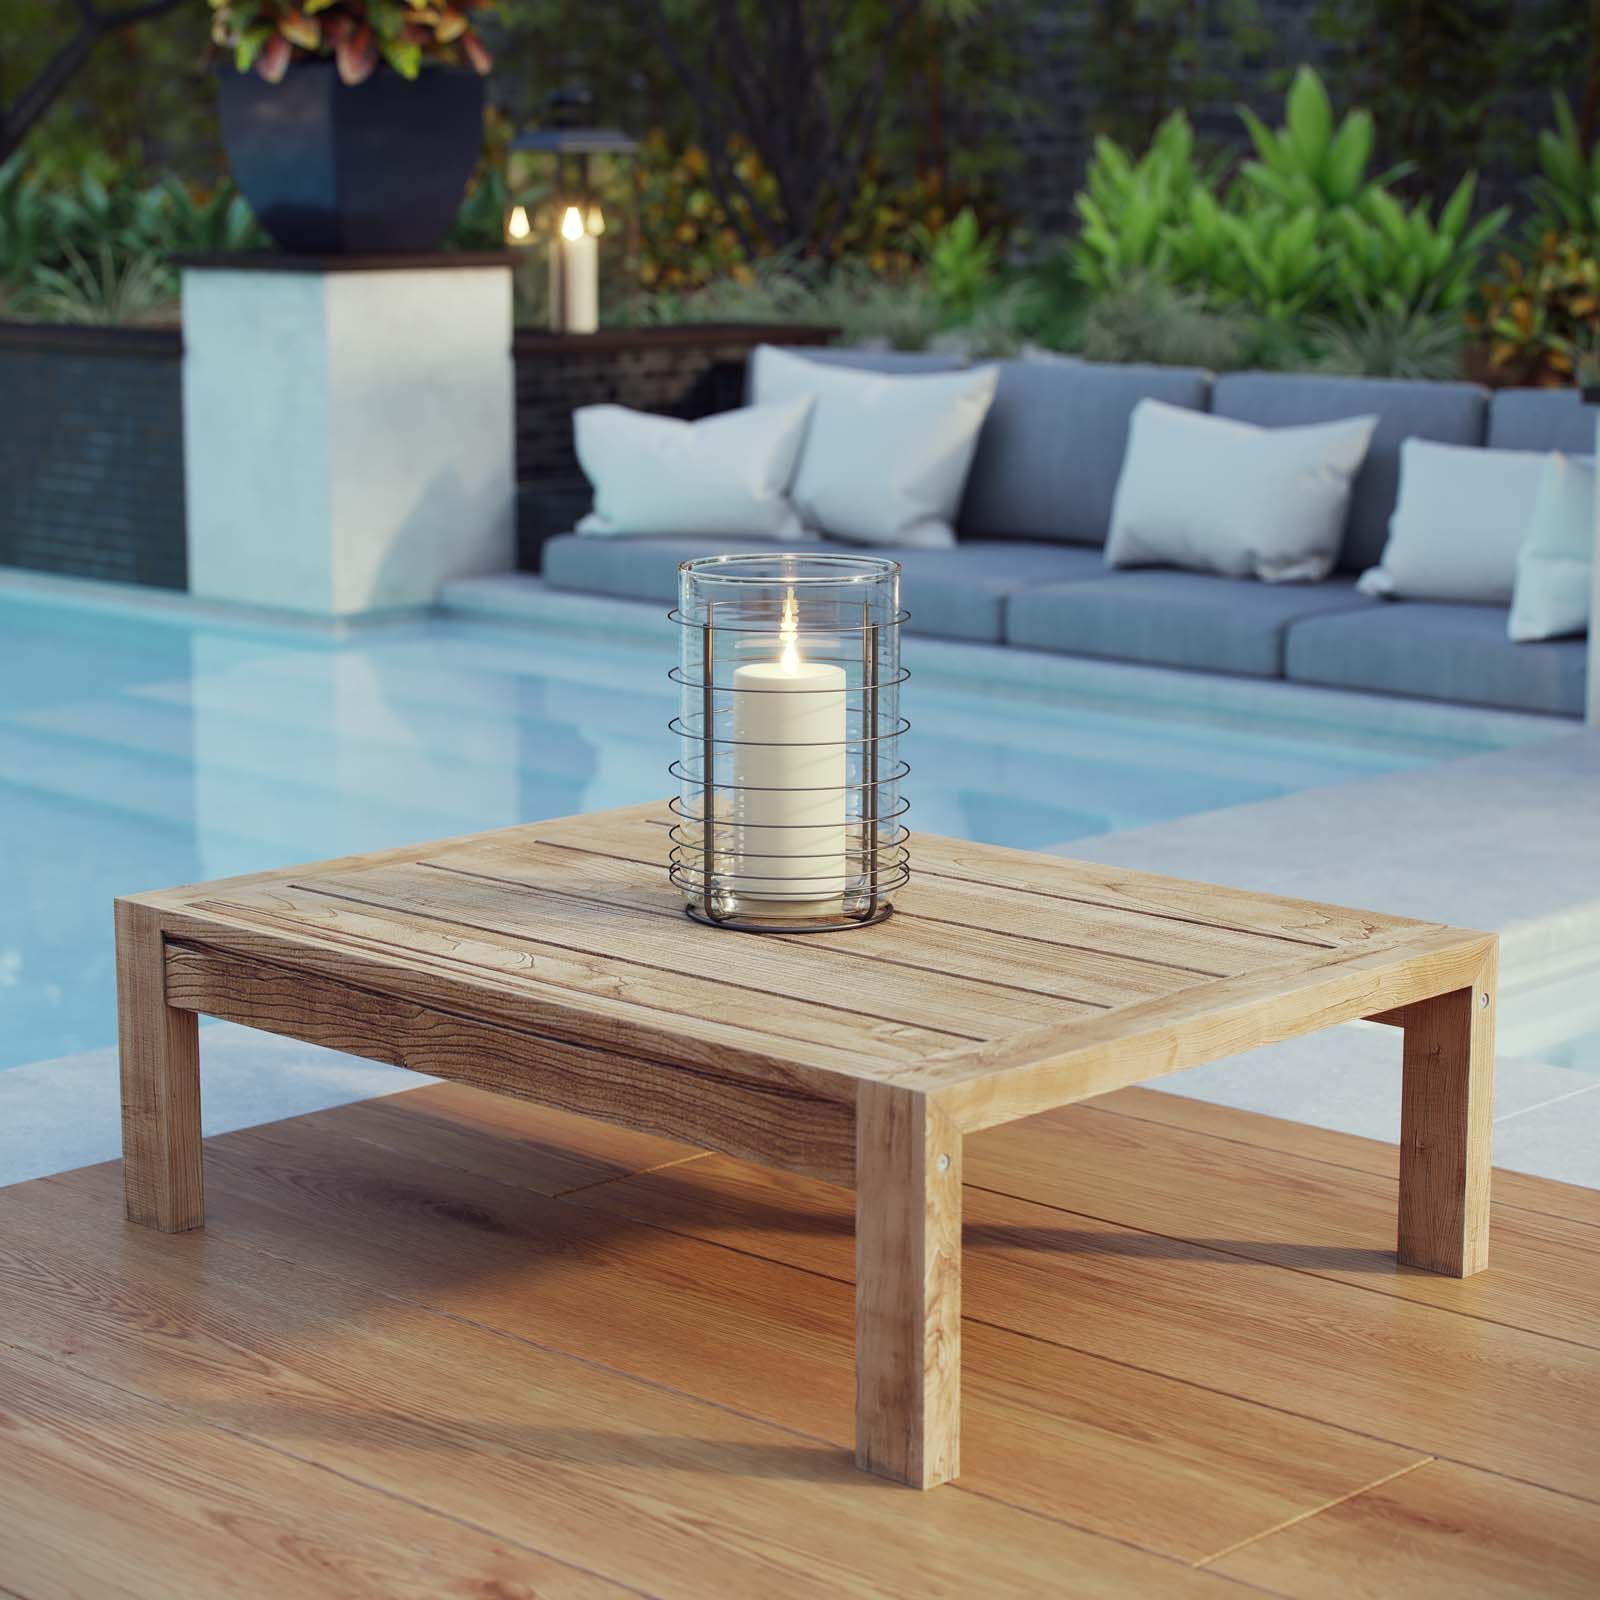 Upland Outdoor Patio Wood Coffee Table Natural In Modern Outdoor Patio Coffee Tables (View 11 of 20)